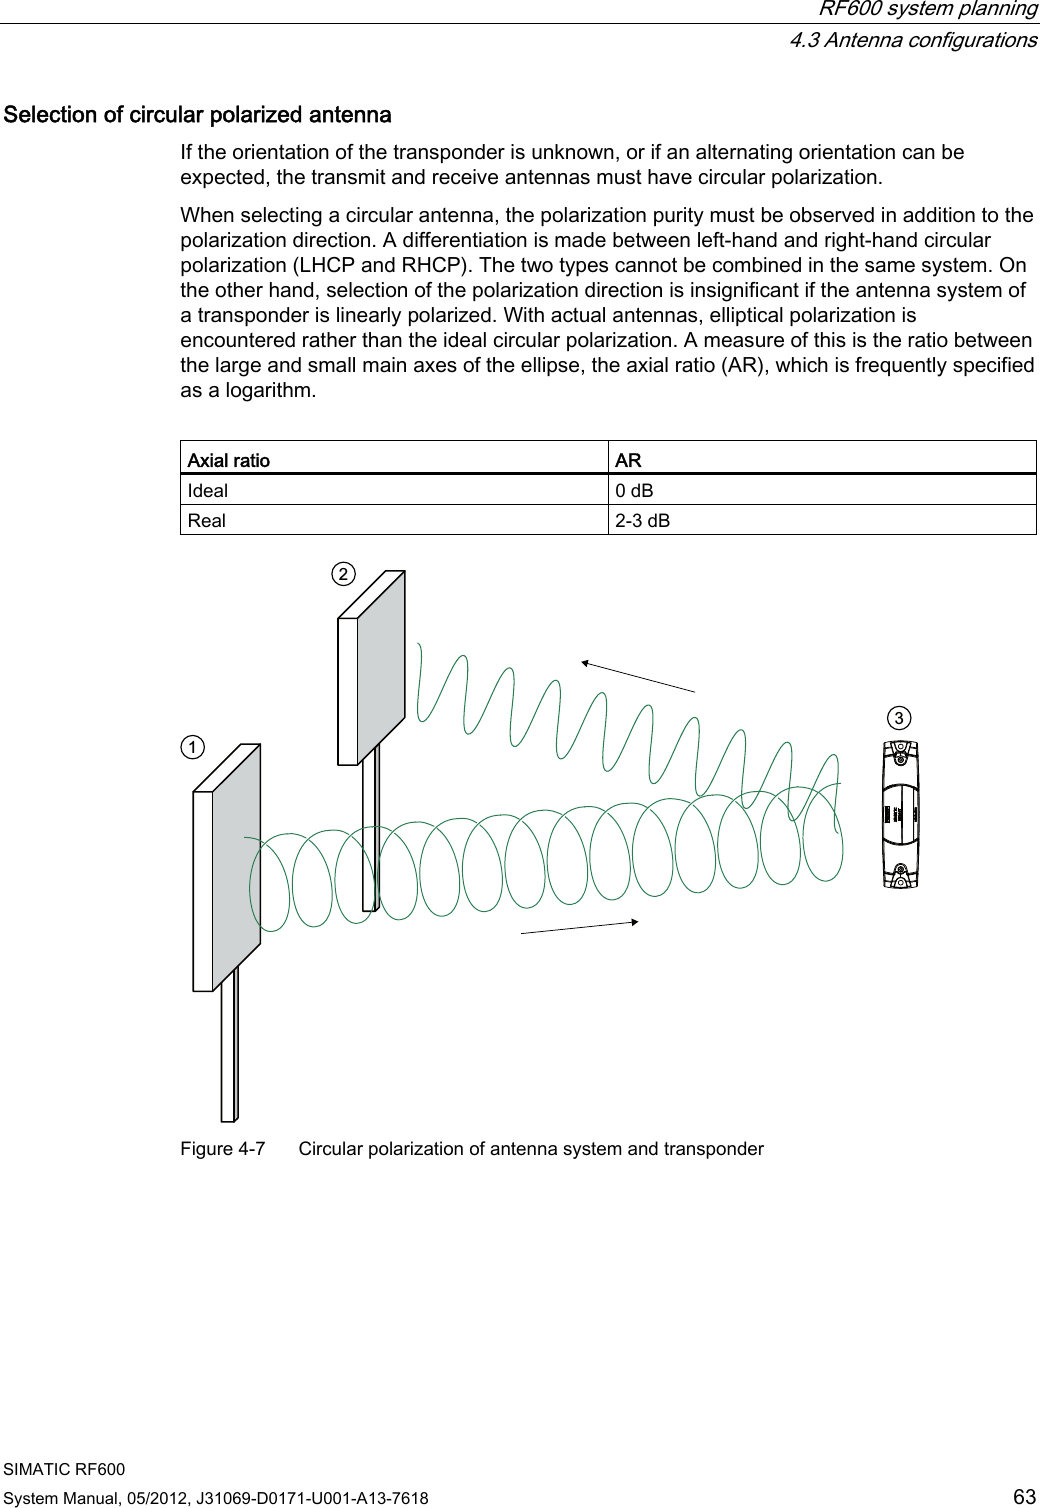  RF600 system planning  4.3 Antenna configurations SIMATIC RF600 System Manual, 05/2012, J31069-D0171-U001-A13-7618  63 Selection of circular polarized antenna If the orientation of the transponder is unknown, or if an alternating orientation can be expected, the transmit and receive antennas must have circular polarization. When selecting a circular antenna, the polarization purity must be observed in addition to the polarization direction. A differentiation is made between left-hand and right-hand circular polarization (LHCP and RHCP). The two types cannot be combined in the same system. On the other hand, selection of the polarization direction is insignificant if the antenna system of a transponder is linearly polarized. With actual antennas, elliptical polarization is encountered rather than the ideal circular polarization. A measure of this is the ratio between the large and small main axes of the ellipse, the axial ratio (AR), which is frequently specified as a logarithm.  Axial ratio  AR Ideal  0 dB Real  2-3 dB  Figure 4-7  Circular polarization of antenna system and transponder 